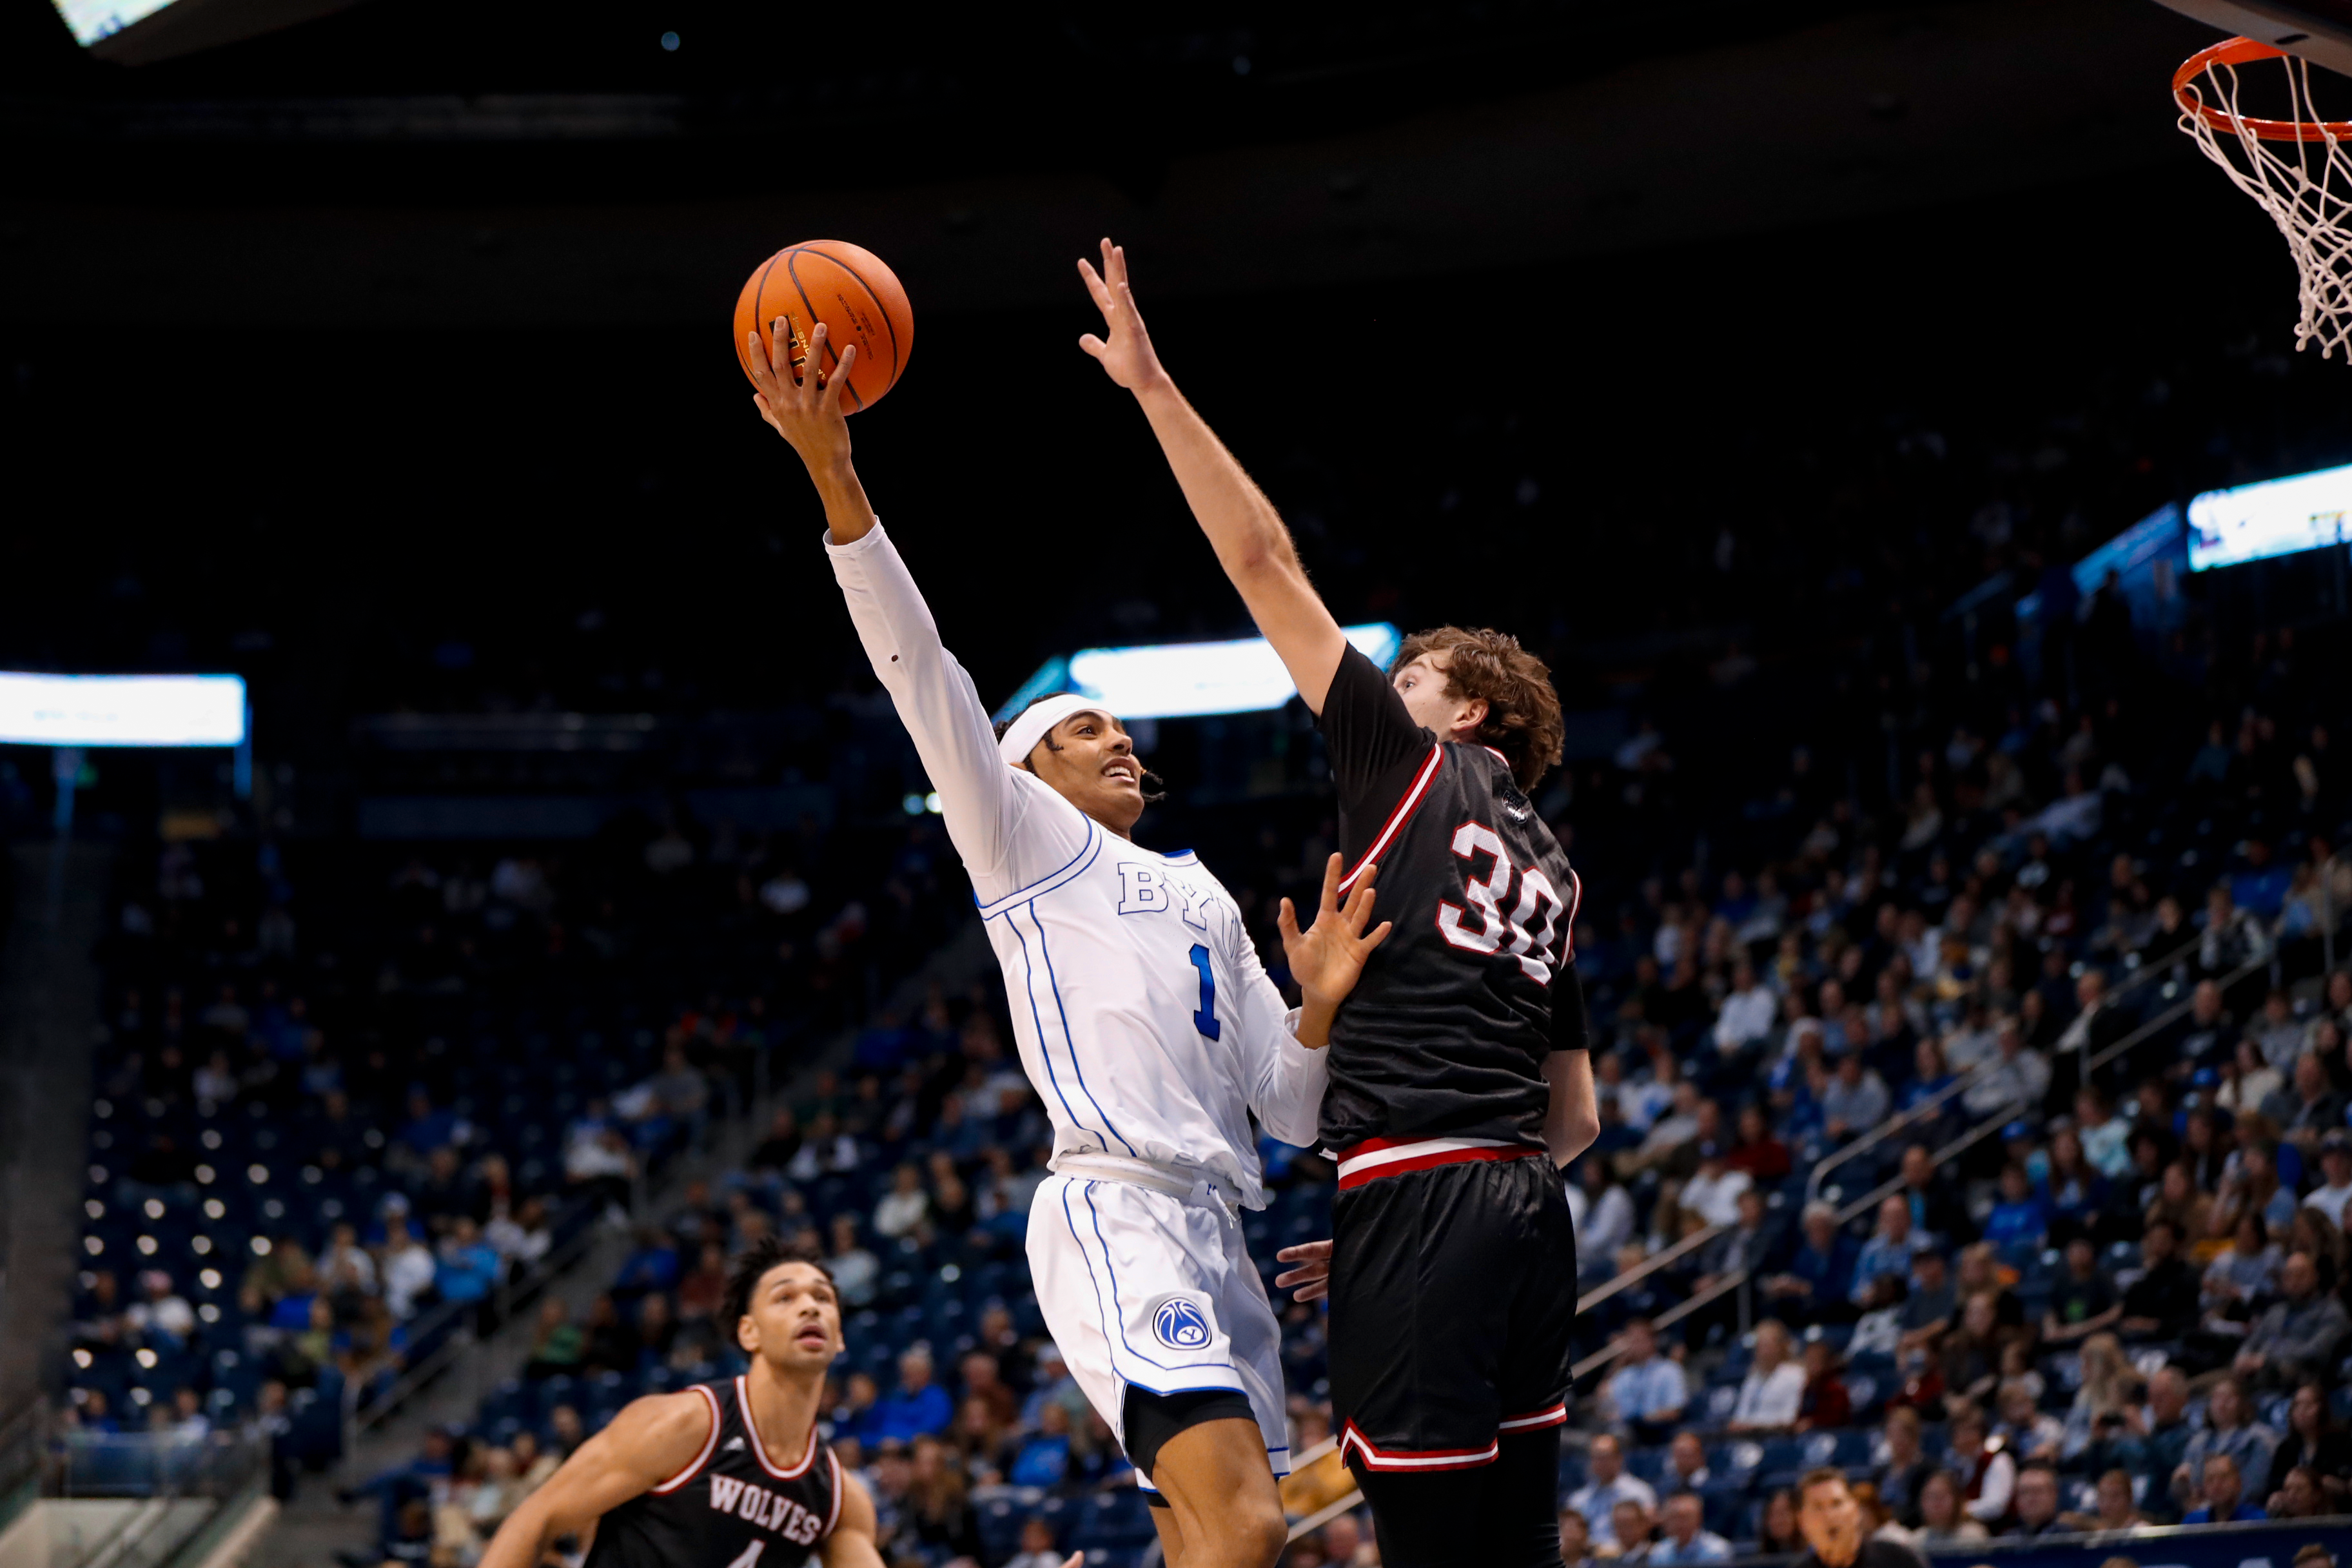 Trey Stewart puts up a shot during a game against Western Oregon at the Marriott Center.